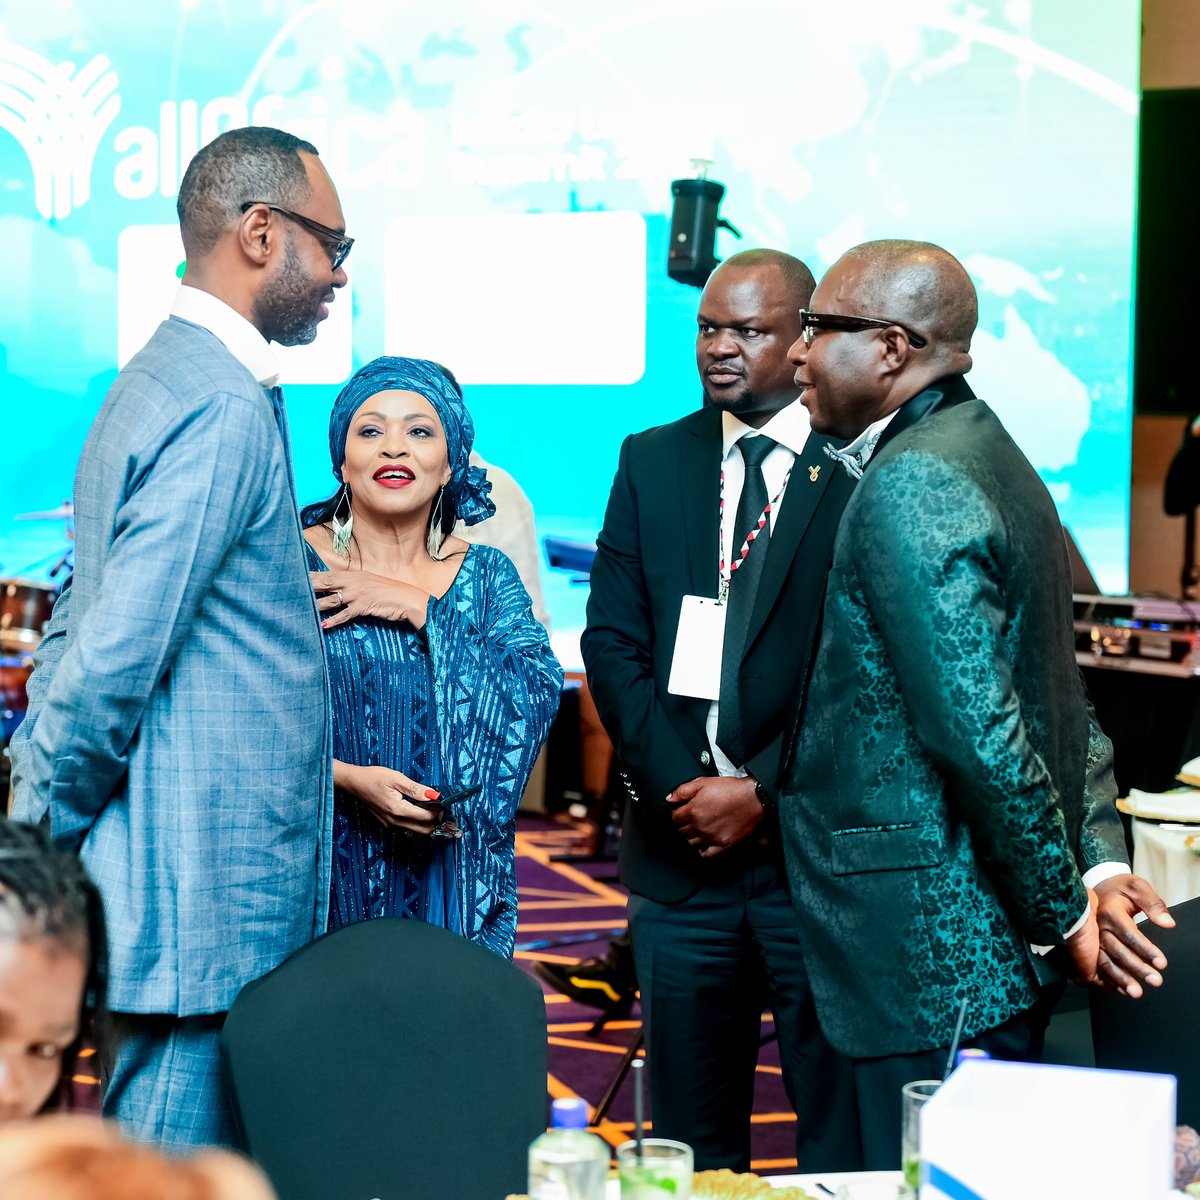 Radio Africa Group CEO Patrick Quarcoo has been awarded a Lifetime Achievement Award, by the AllAfrica Media Leaders’ Summit at a colourful event at Glee Hotel in Runda, Nairobi on Thursday night. Quarcoo has been honoured at the AllAfrica Gala Dinner and Excellence Award…